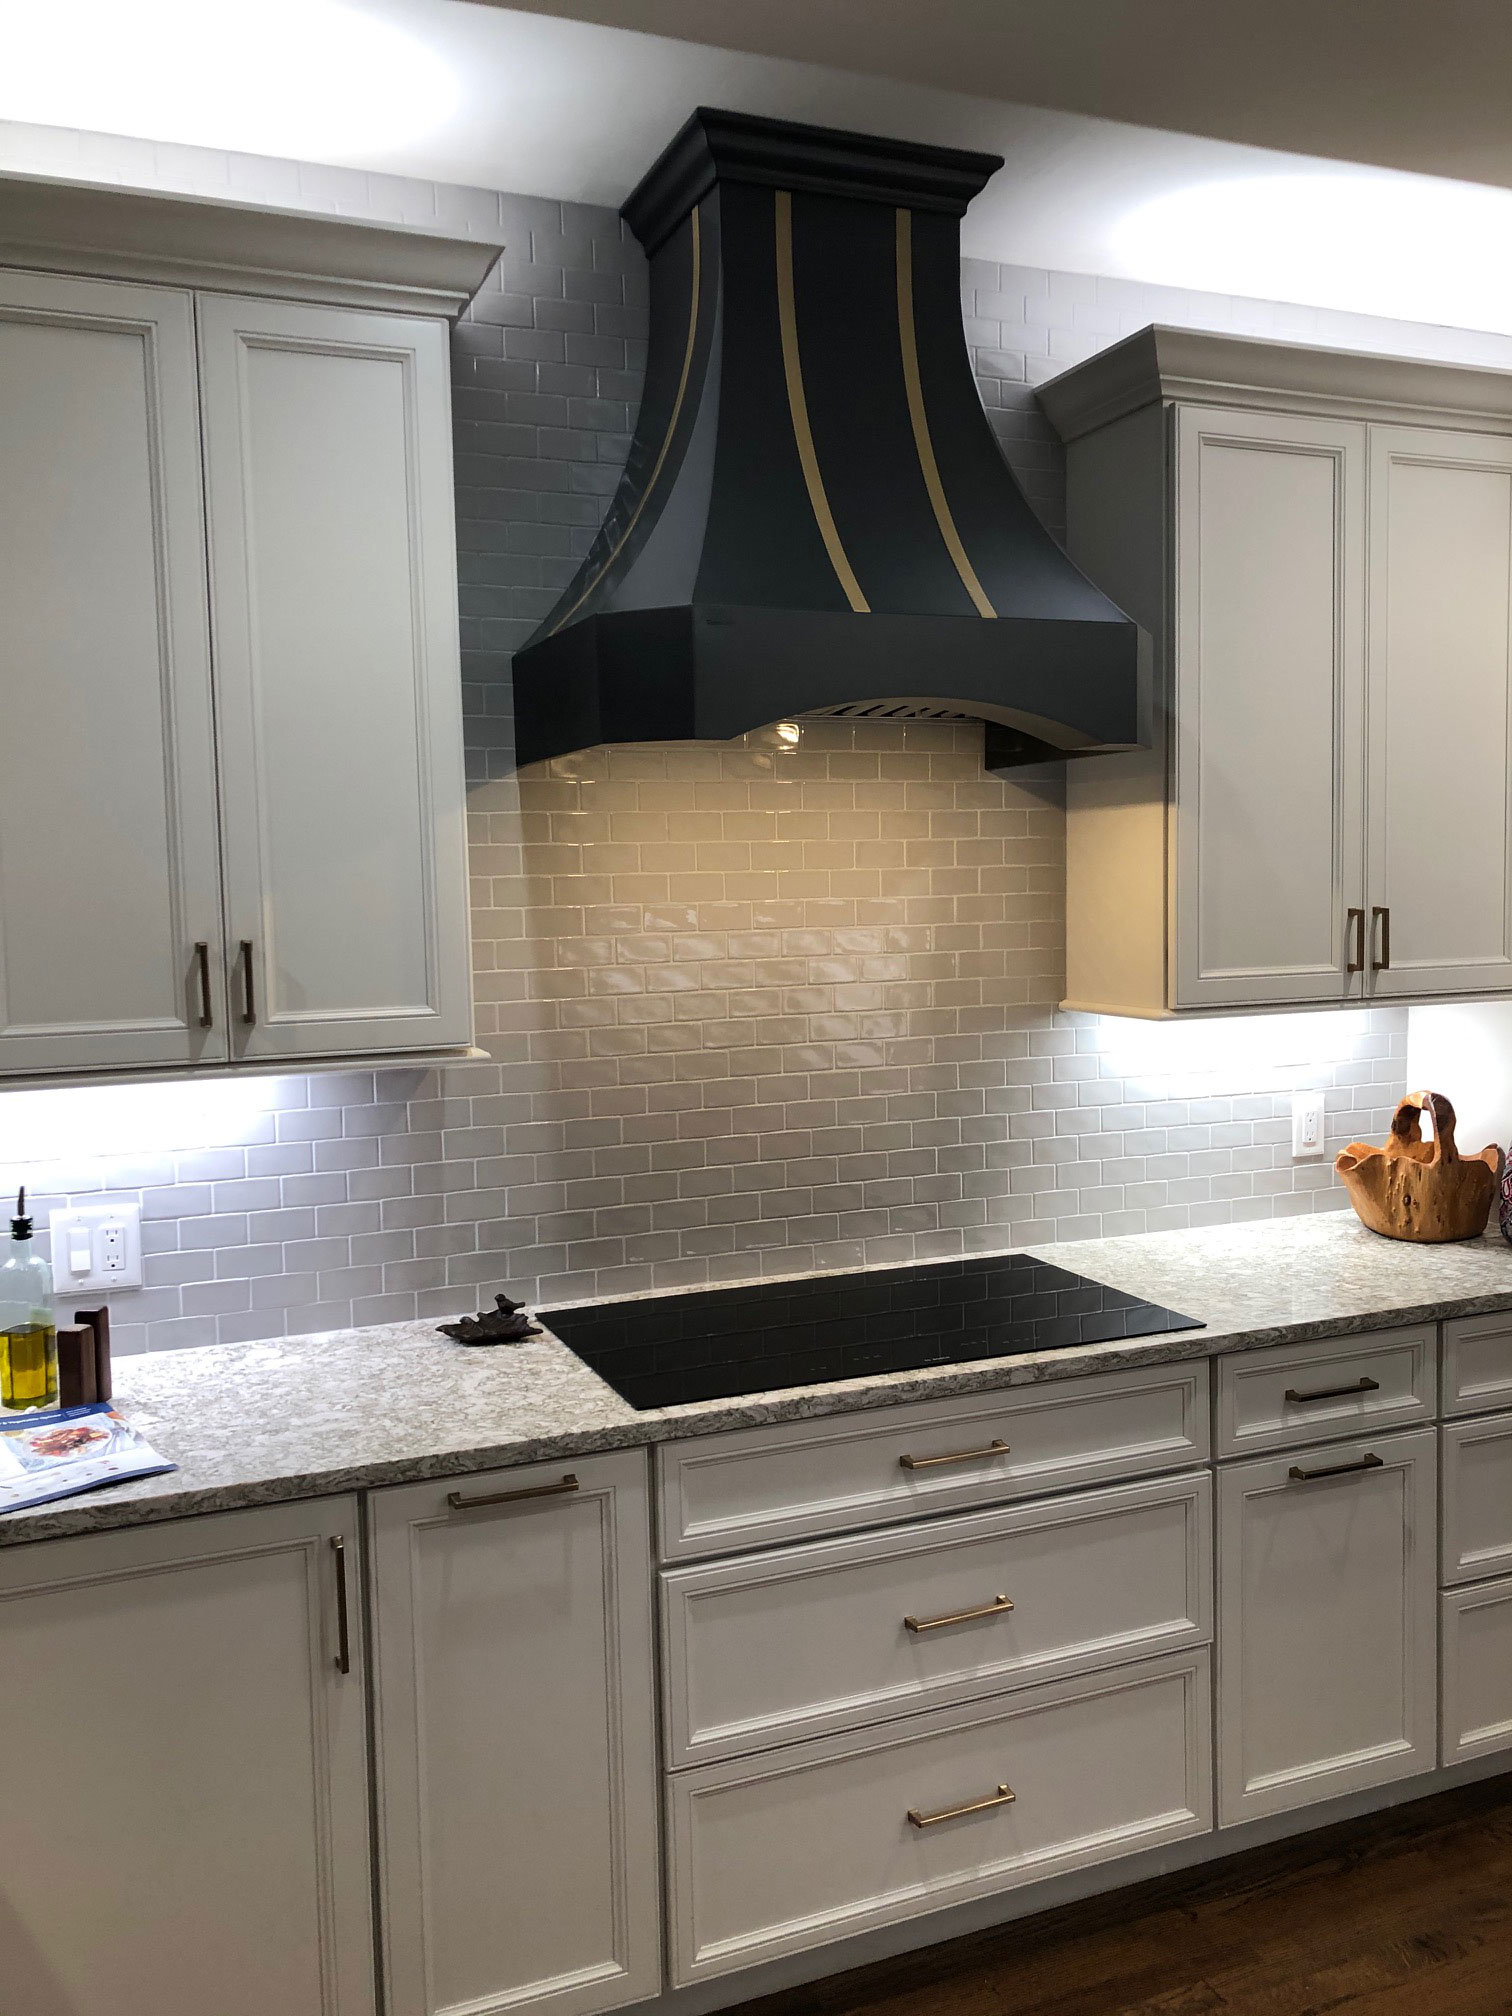  Black copper range hood brass bands and white cabinets World CopperSmith